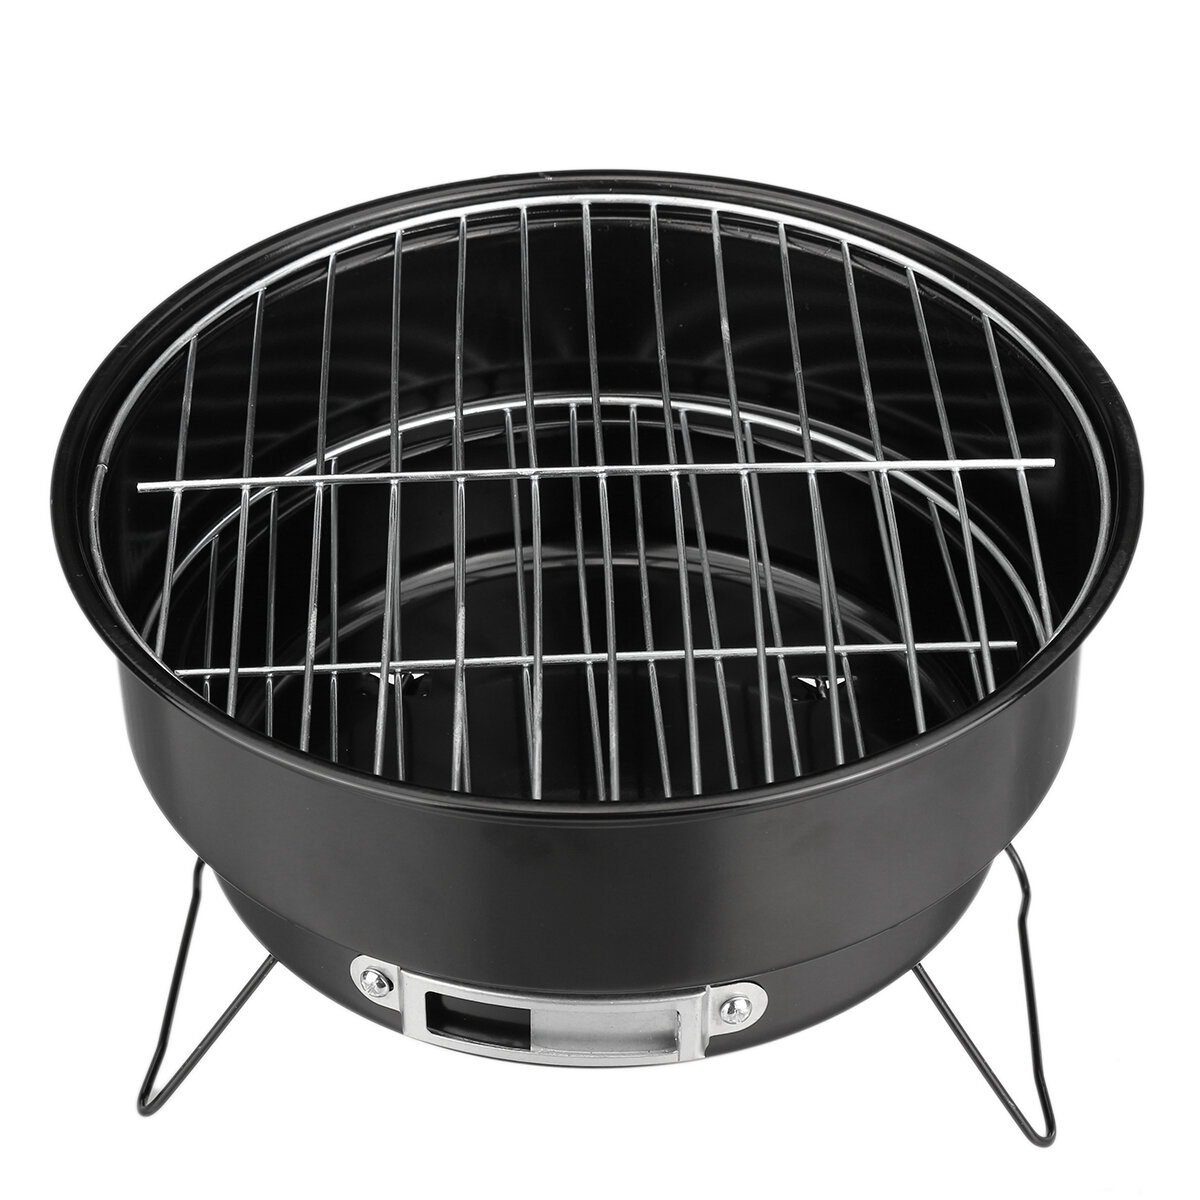 Ronde Barbecue Grill Opvouwbare RVS Grill Draagbare Outdoor Camping Barbecue Grill